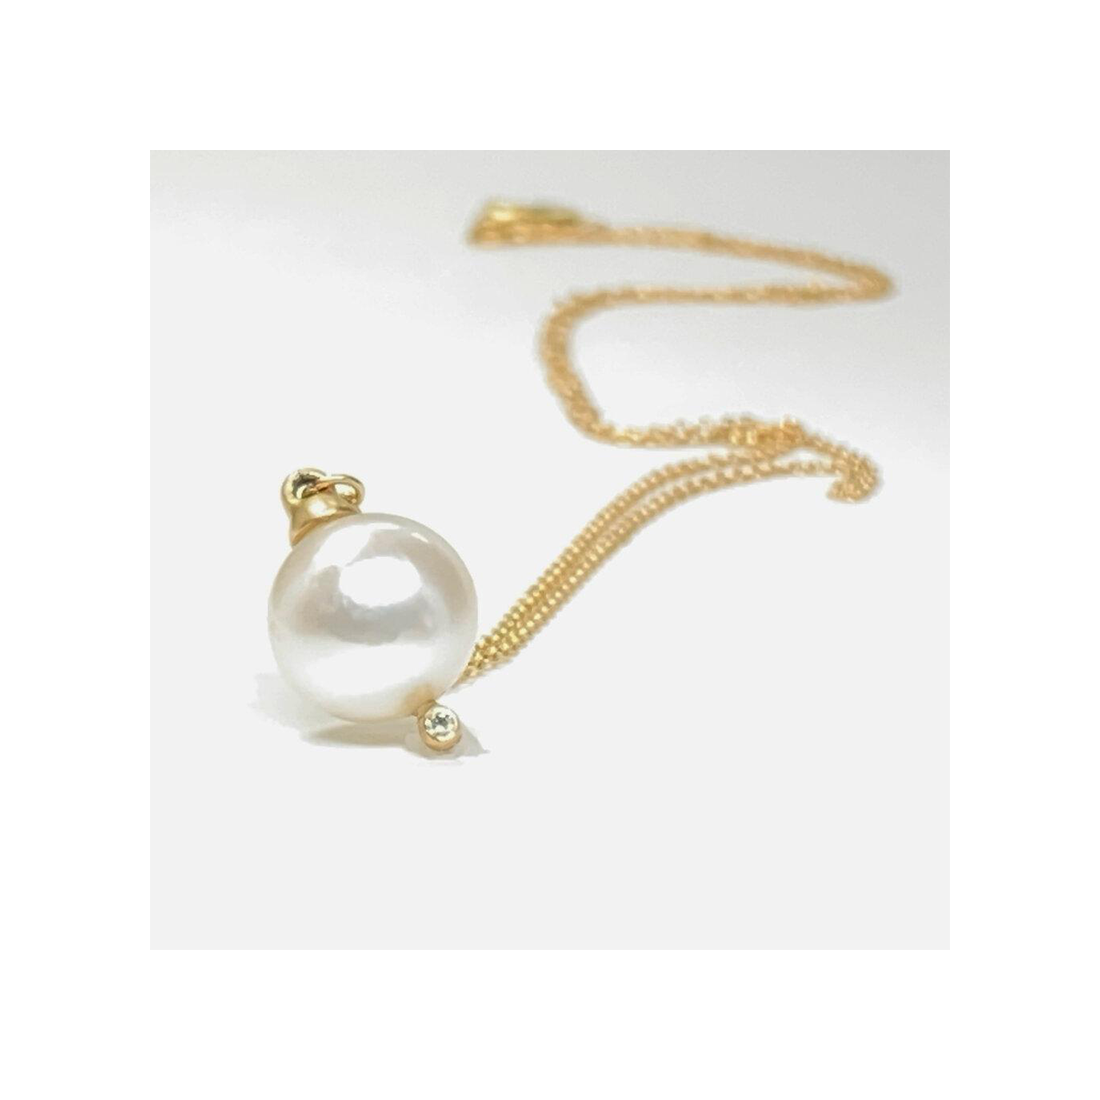 A classic single Japanese pearl necklace with a diamond to give it that extra sparkle.  Details  8mm Japanese Pearl 1 Round White Diamond 0.05ct Pendant measures 16.5mm x 9.75mm 18" Chain 14k Yellow Gold Satin Finish